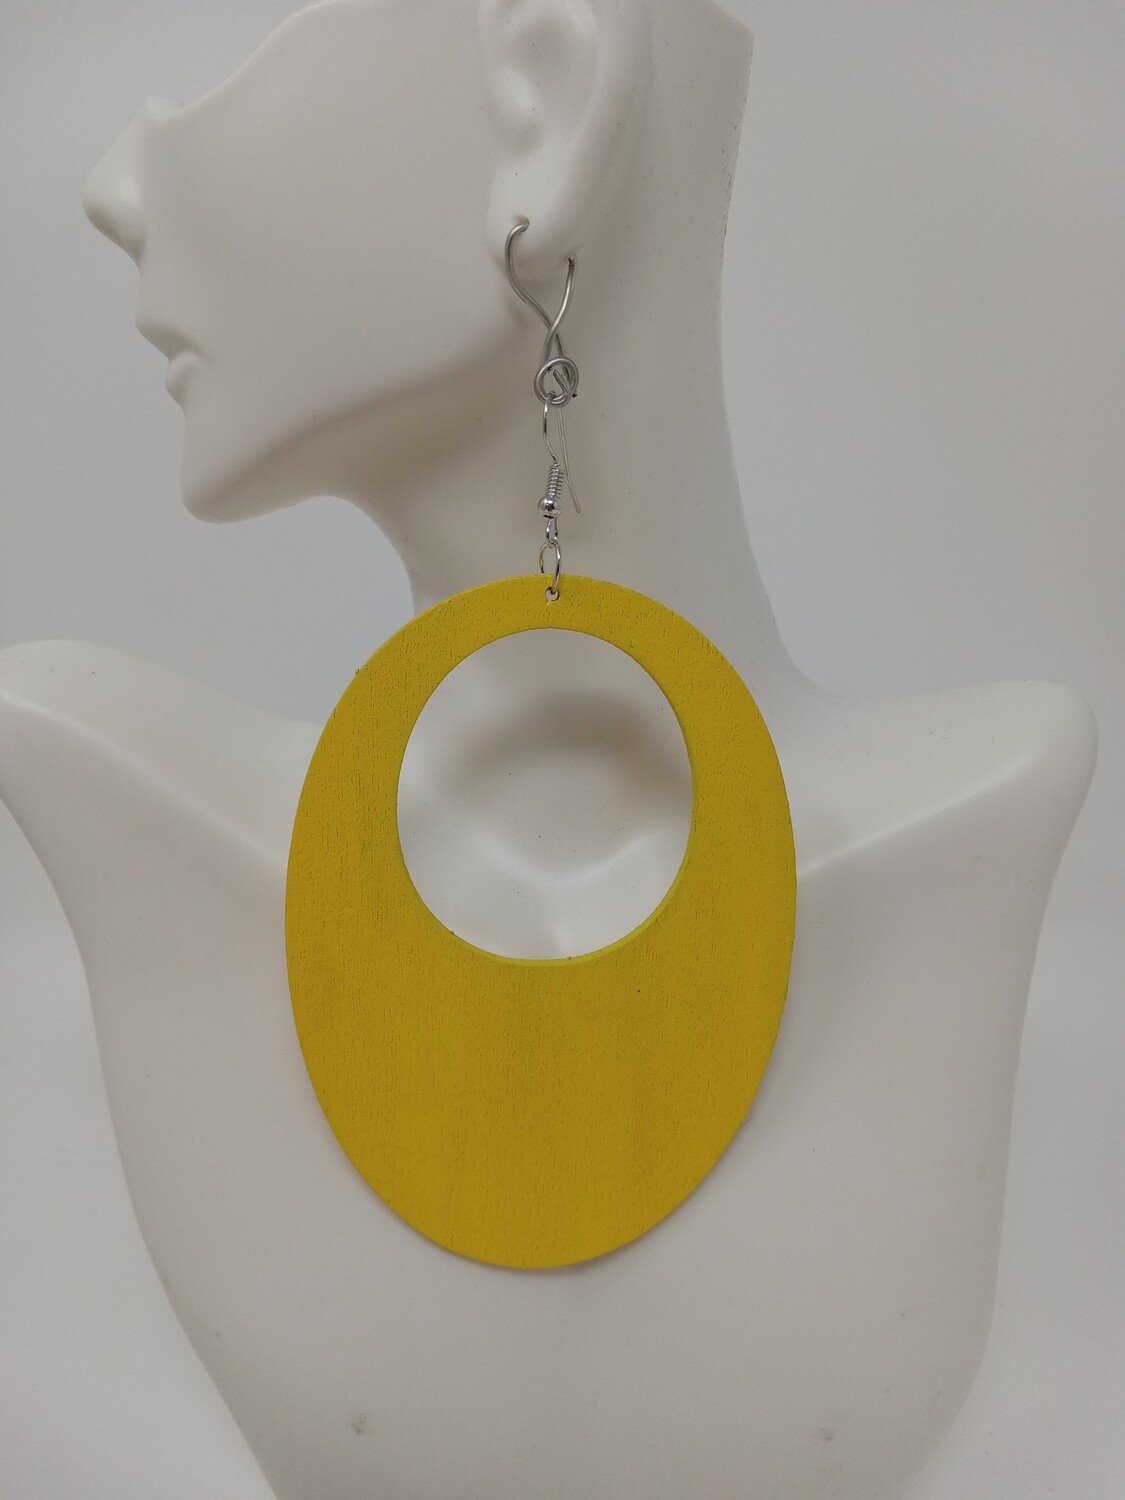 Large Oval Yellow Wooden Earrings